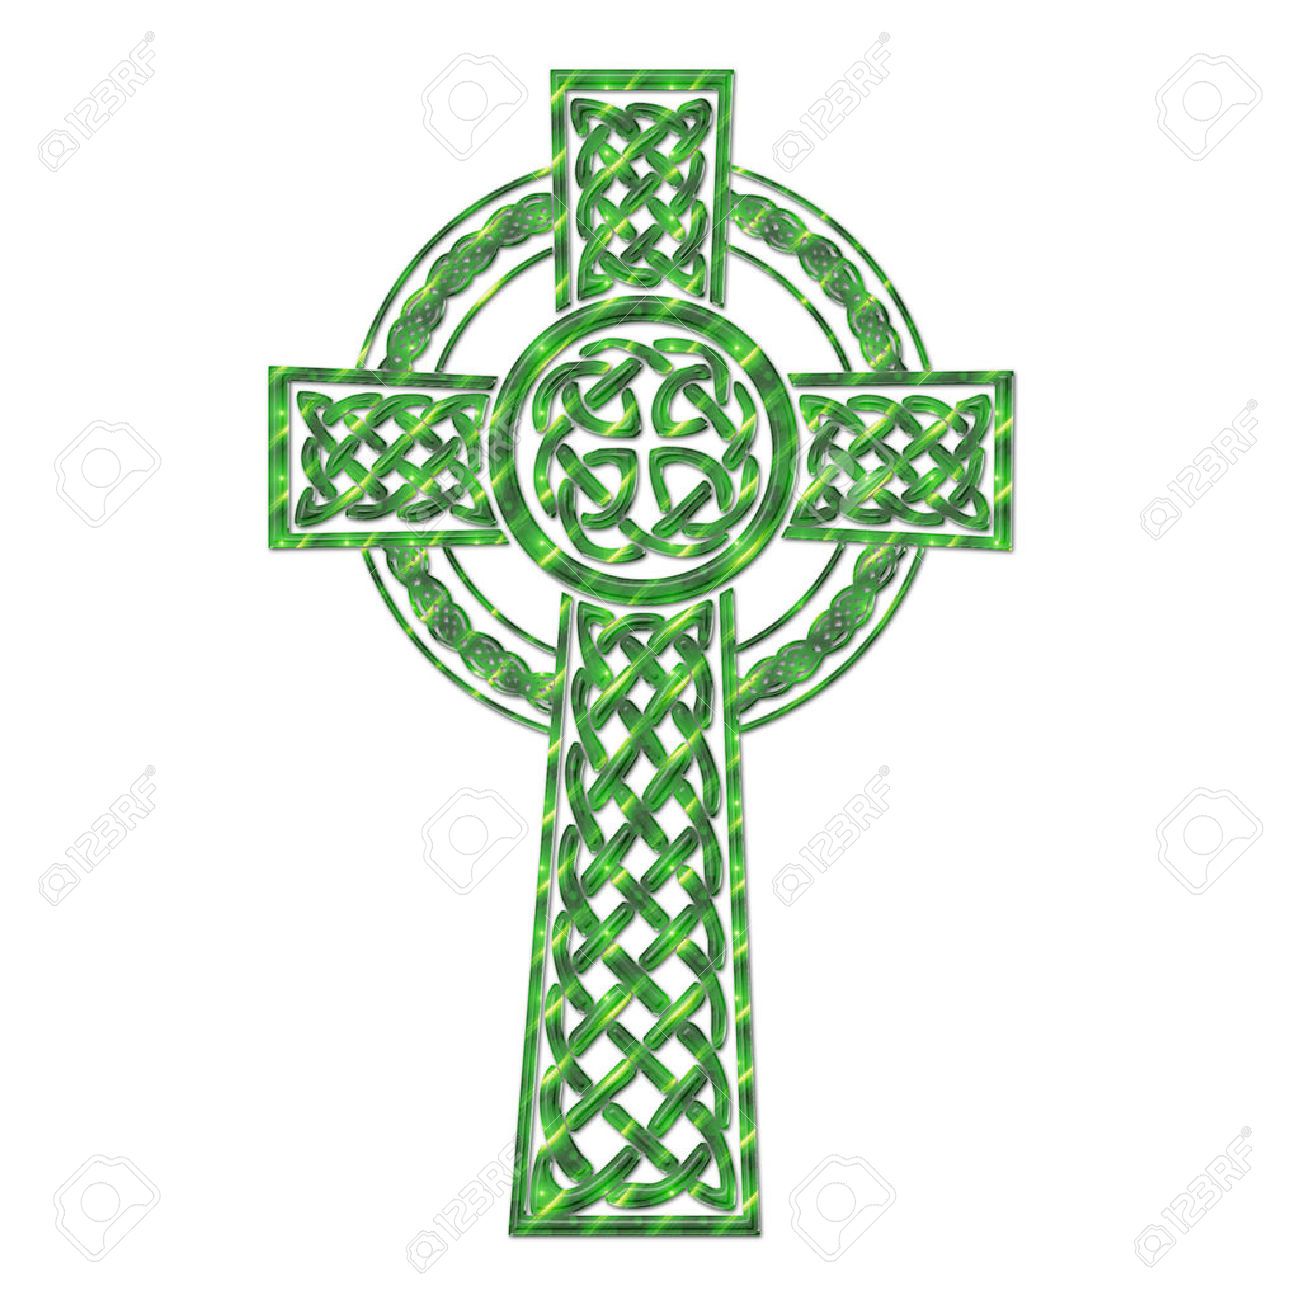 Celtic Cross Stock Photos, Pictures, Royalty Free Celtic.